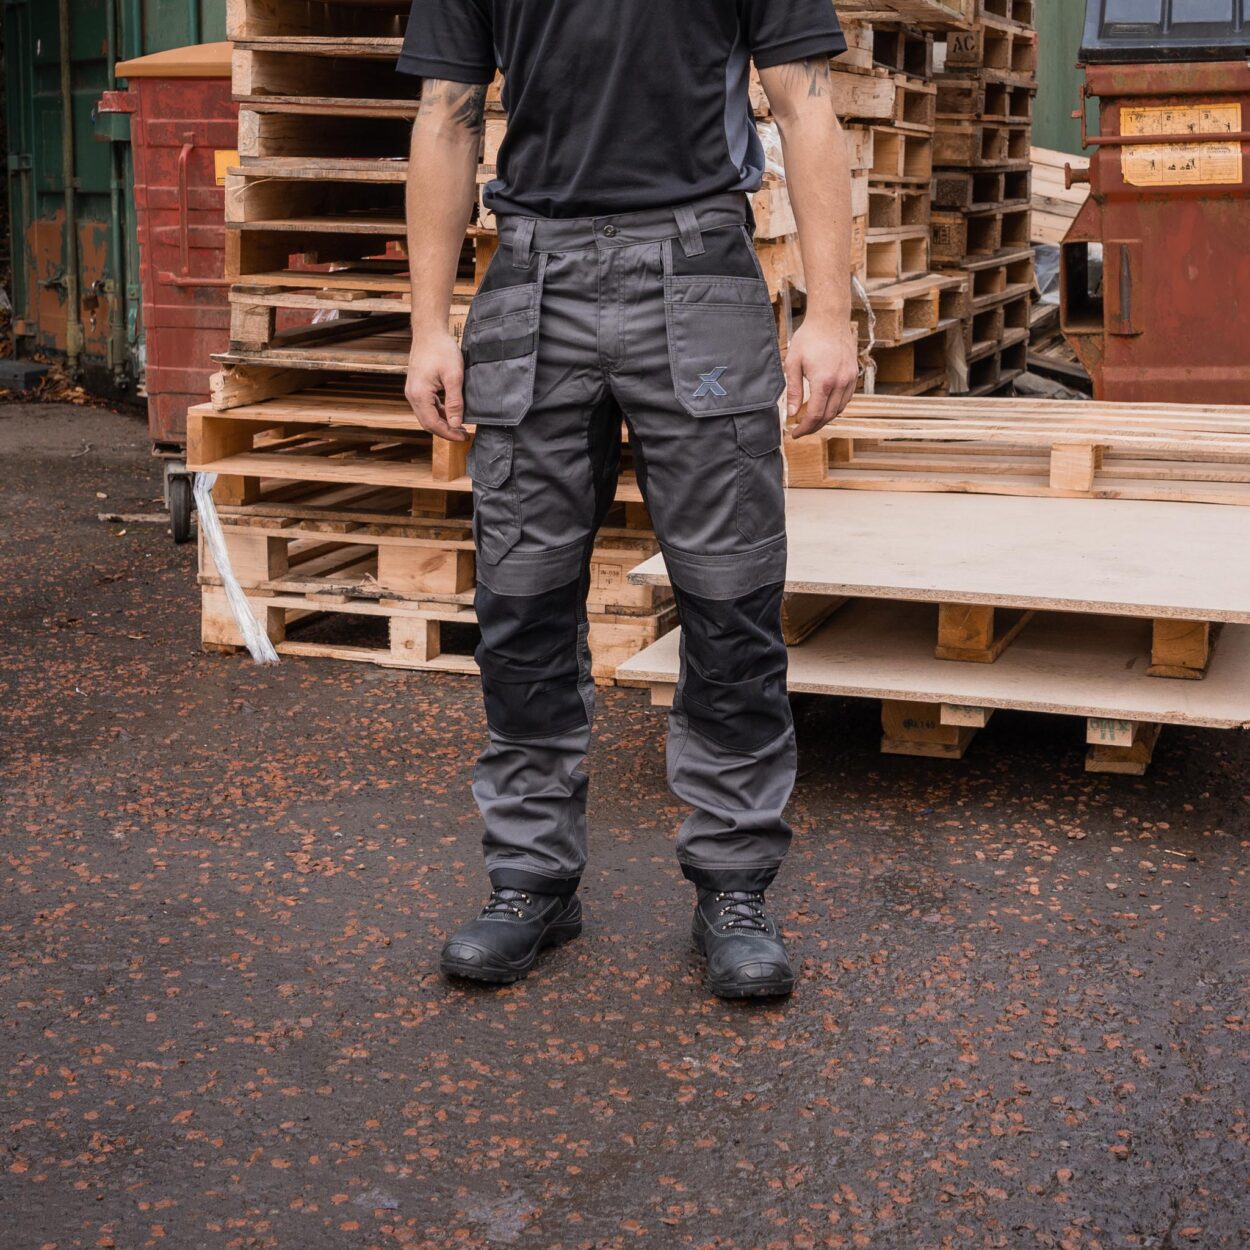 The Snickers Workwear Protective Wear Collection - Industrial Compliance